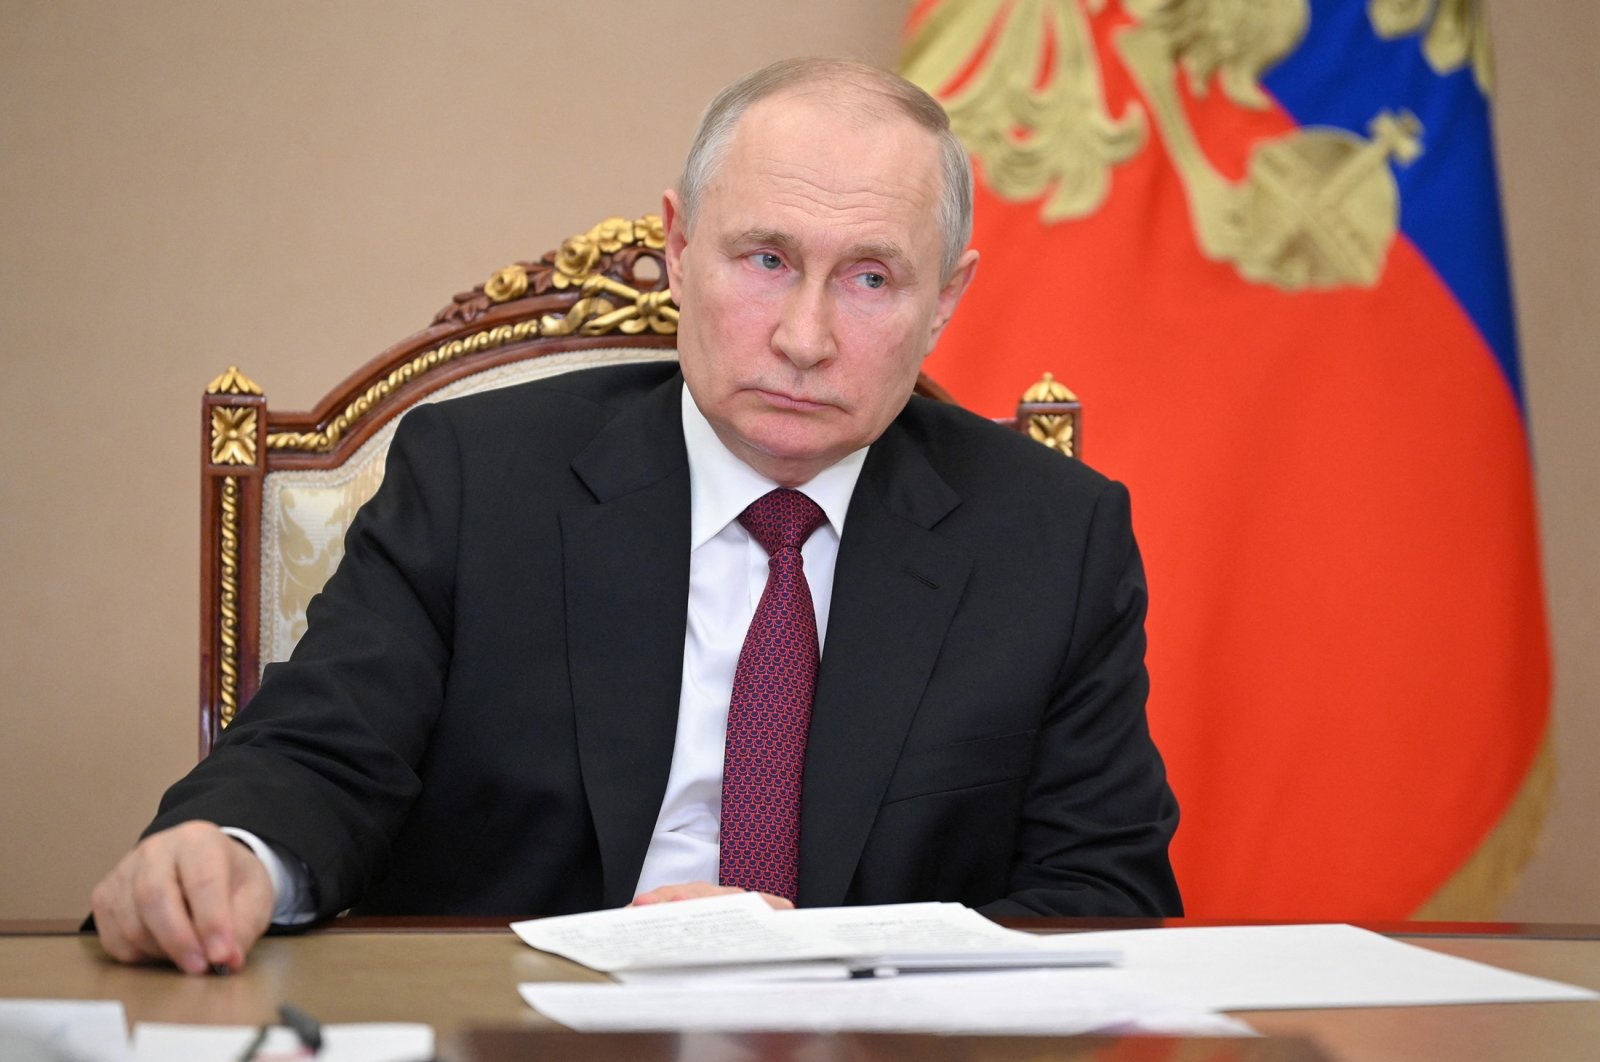 West ’emasculated, perverted’ essence of grain deal: Putin